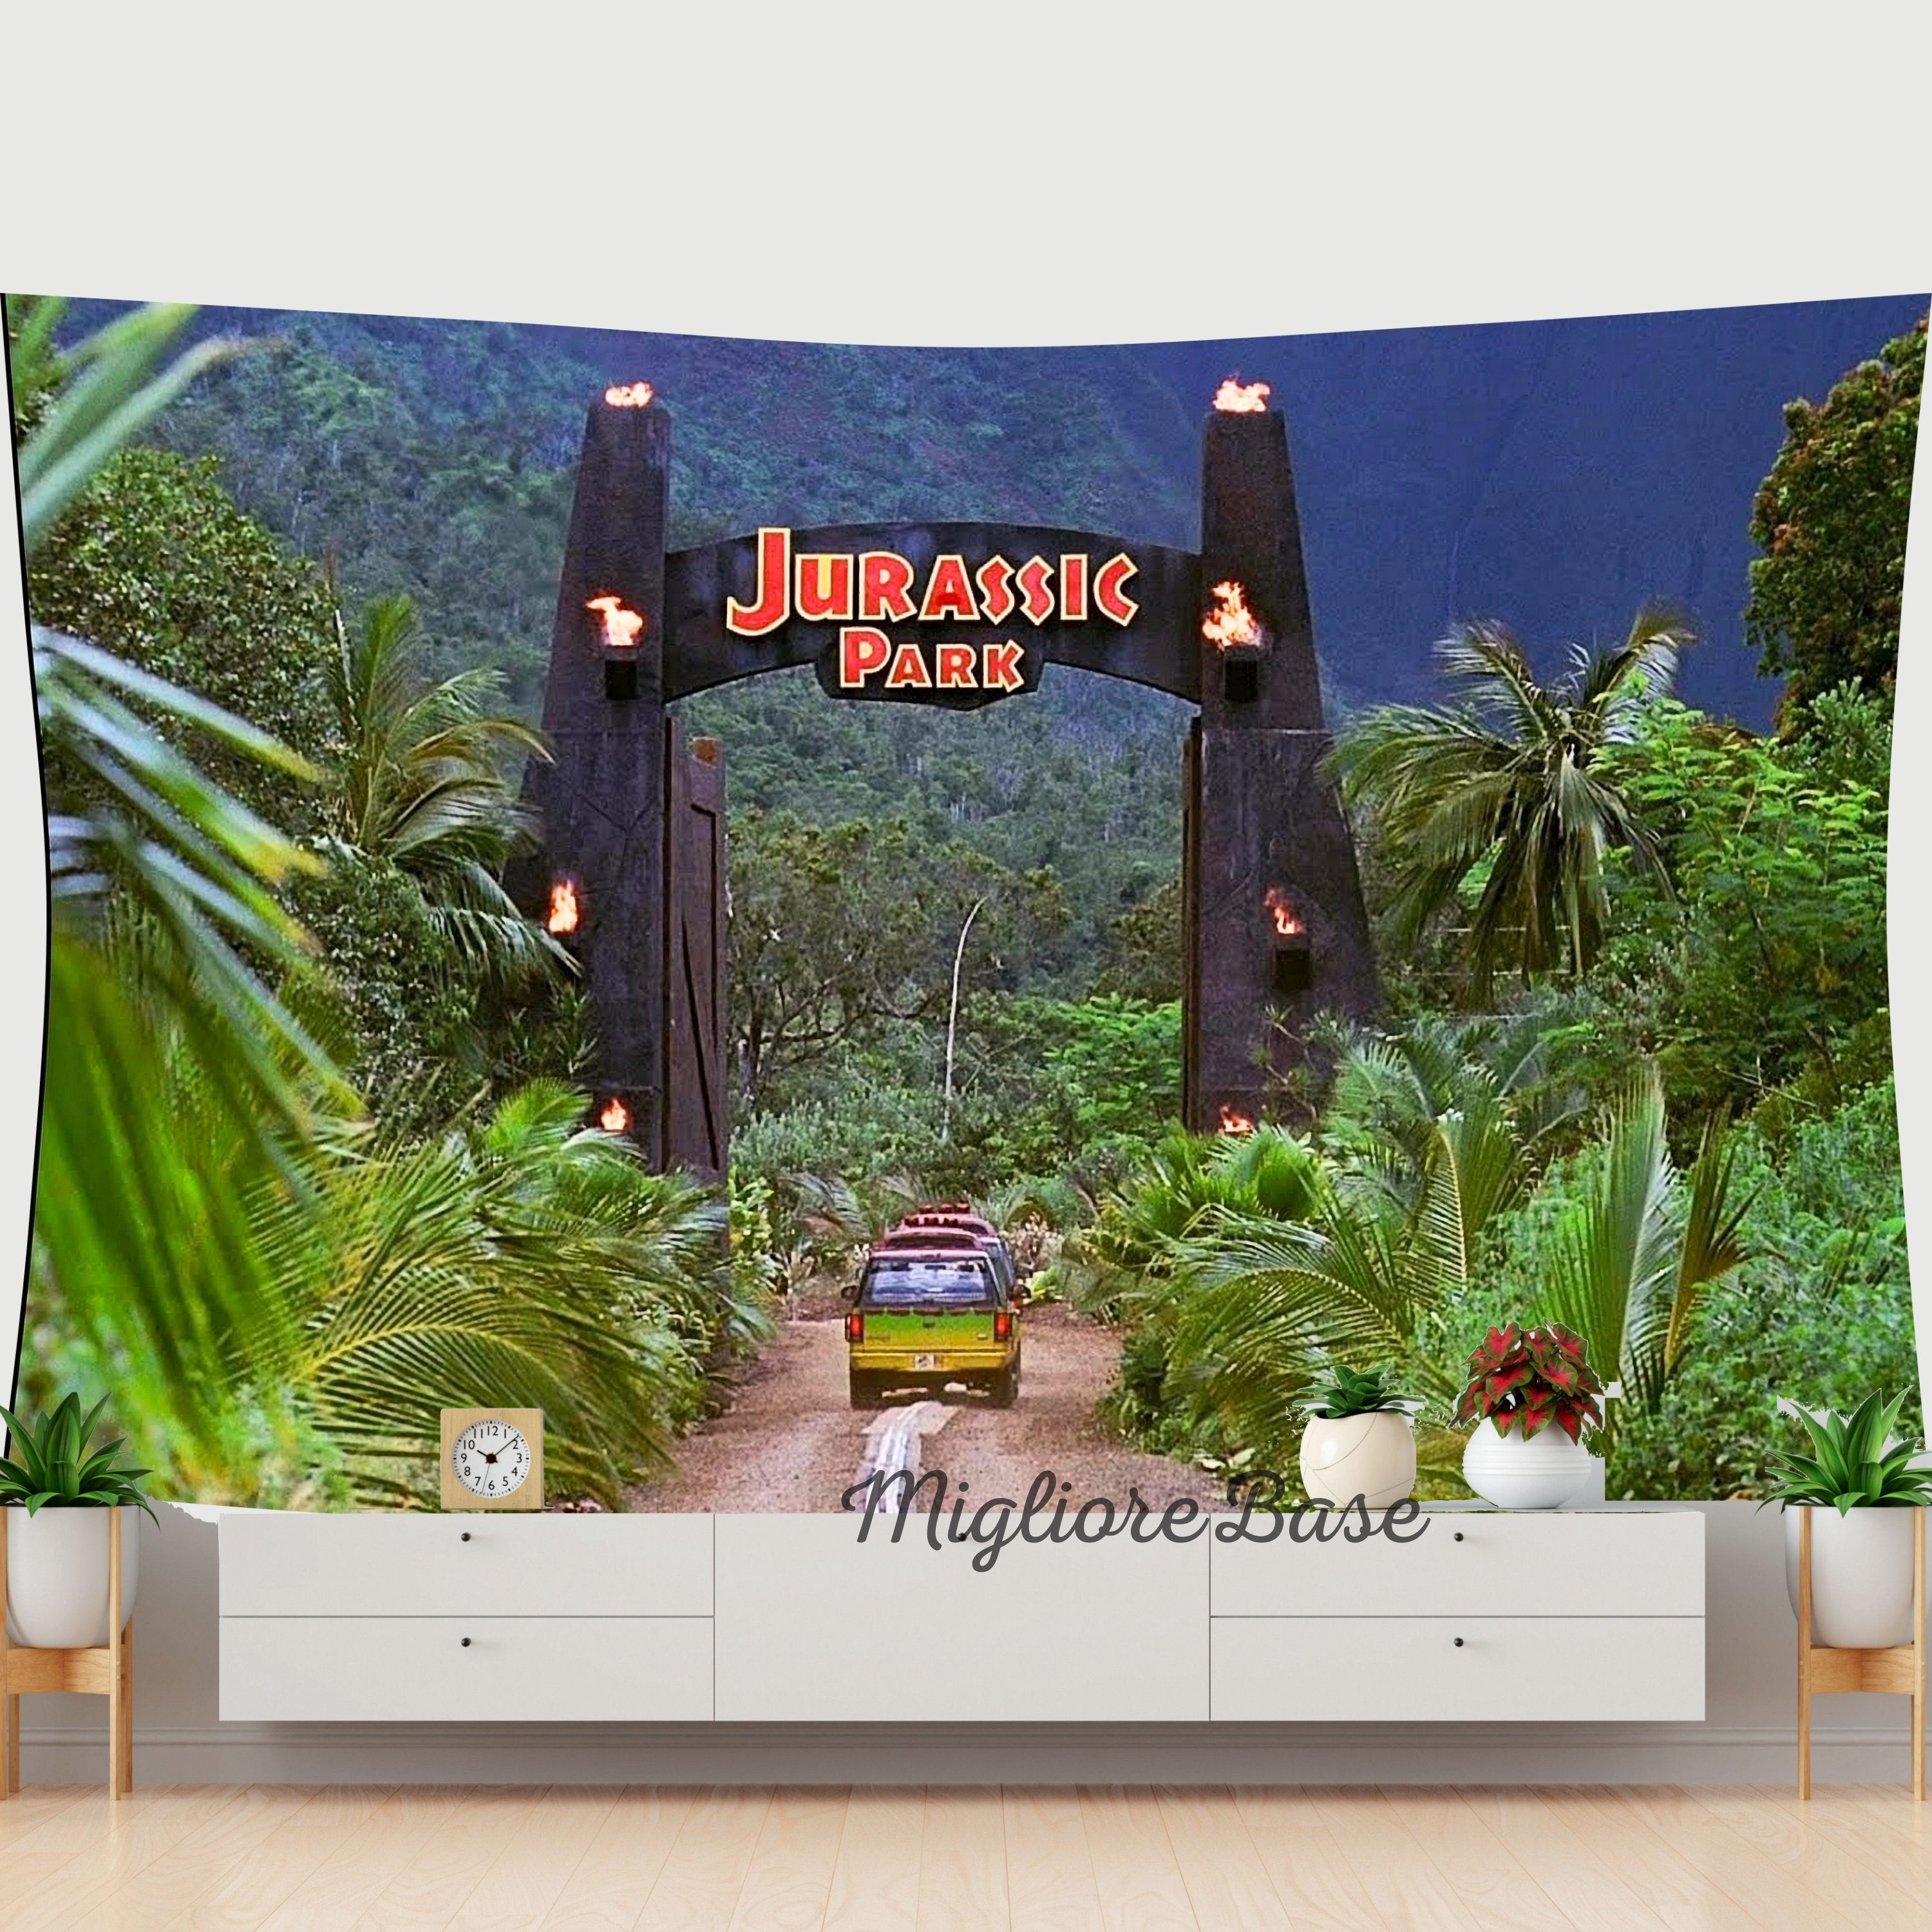 Dinosaur Party Decorations, Dinosaur Birthday Party Supplies & PDF  Downloads, for Boys Girls, Dino Party Decorations with Jurassic Park Fringe